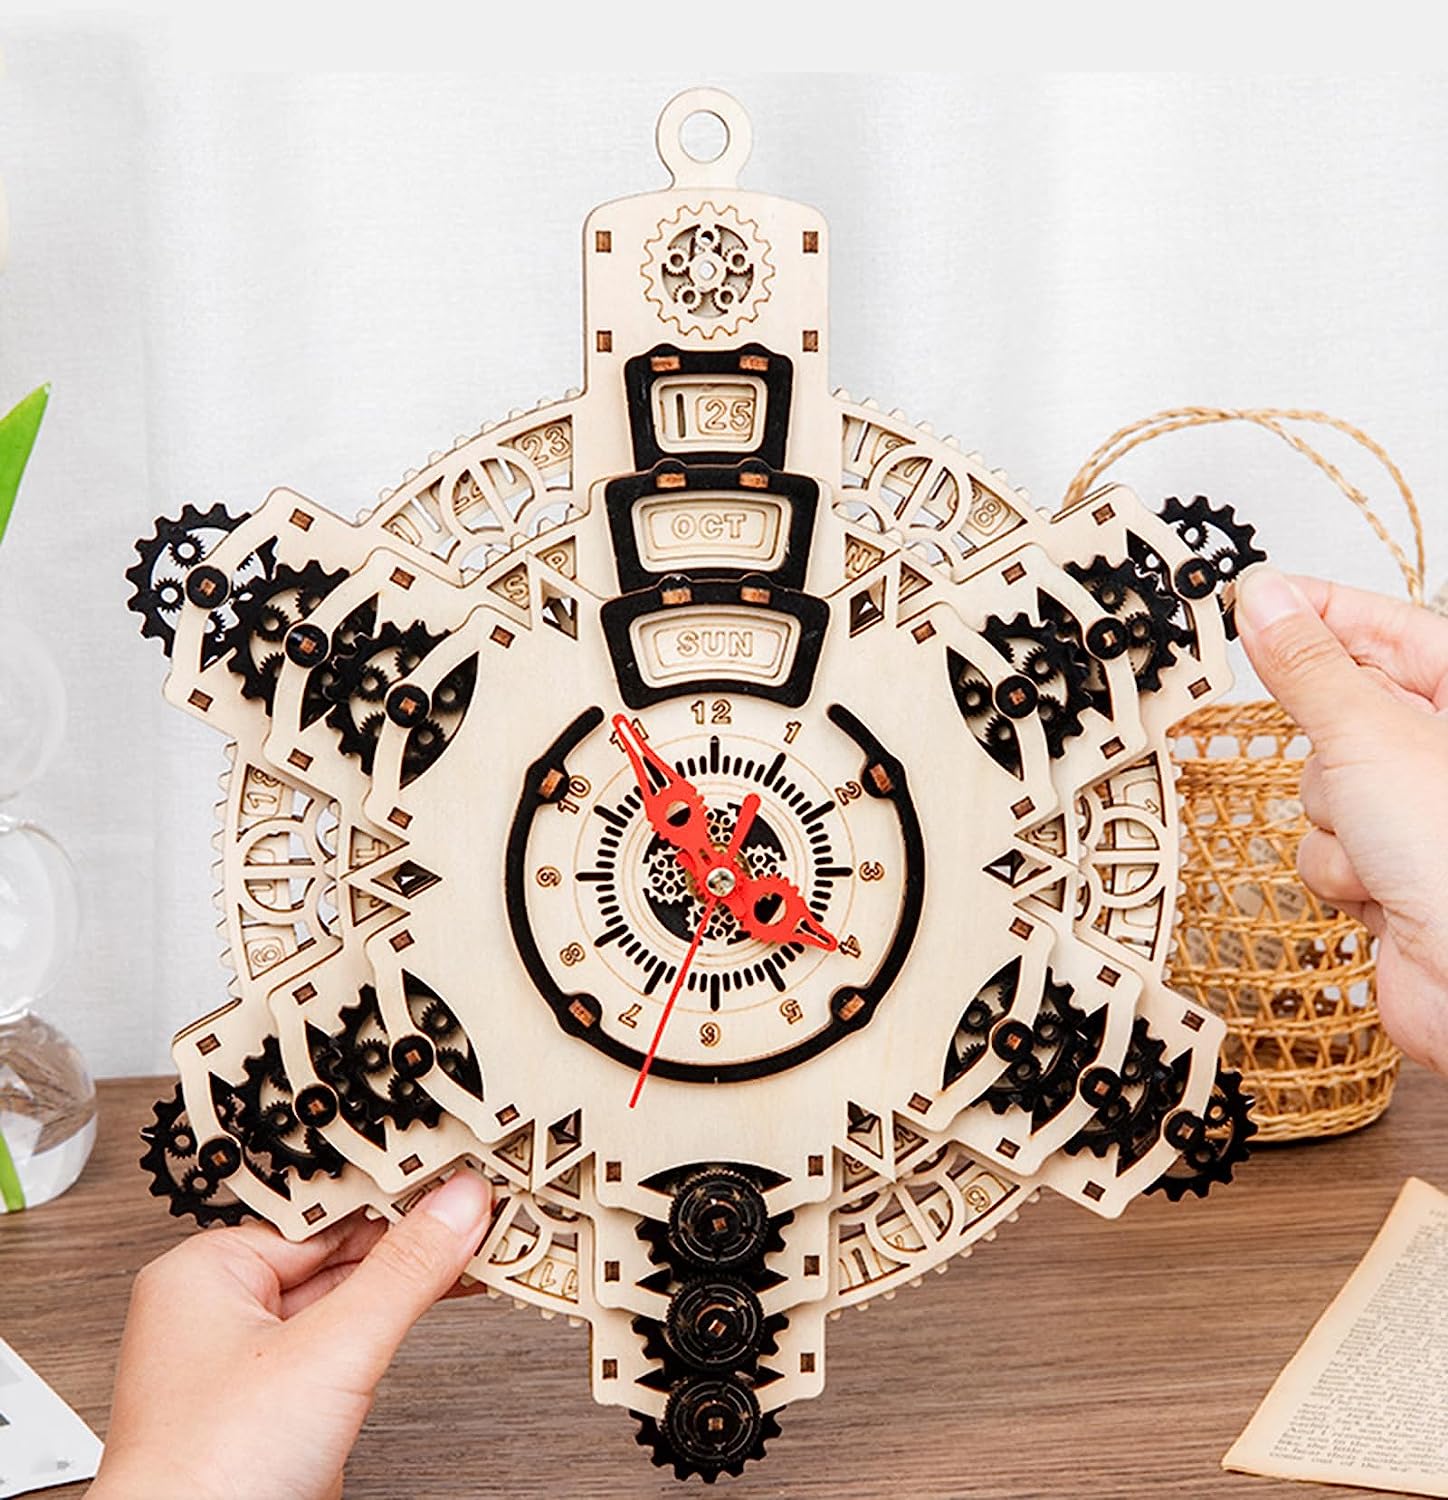 Perpetual Calendar 3D Wooden Stereoscopic Puzzles, Adult and Children Assembled Clocks, Puzzle Wooden Model Kits Creative Birthday Minimalist Decor